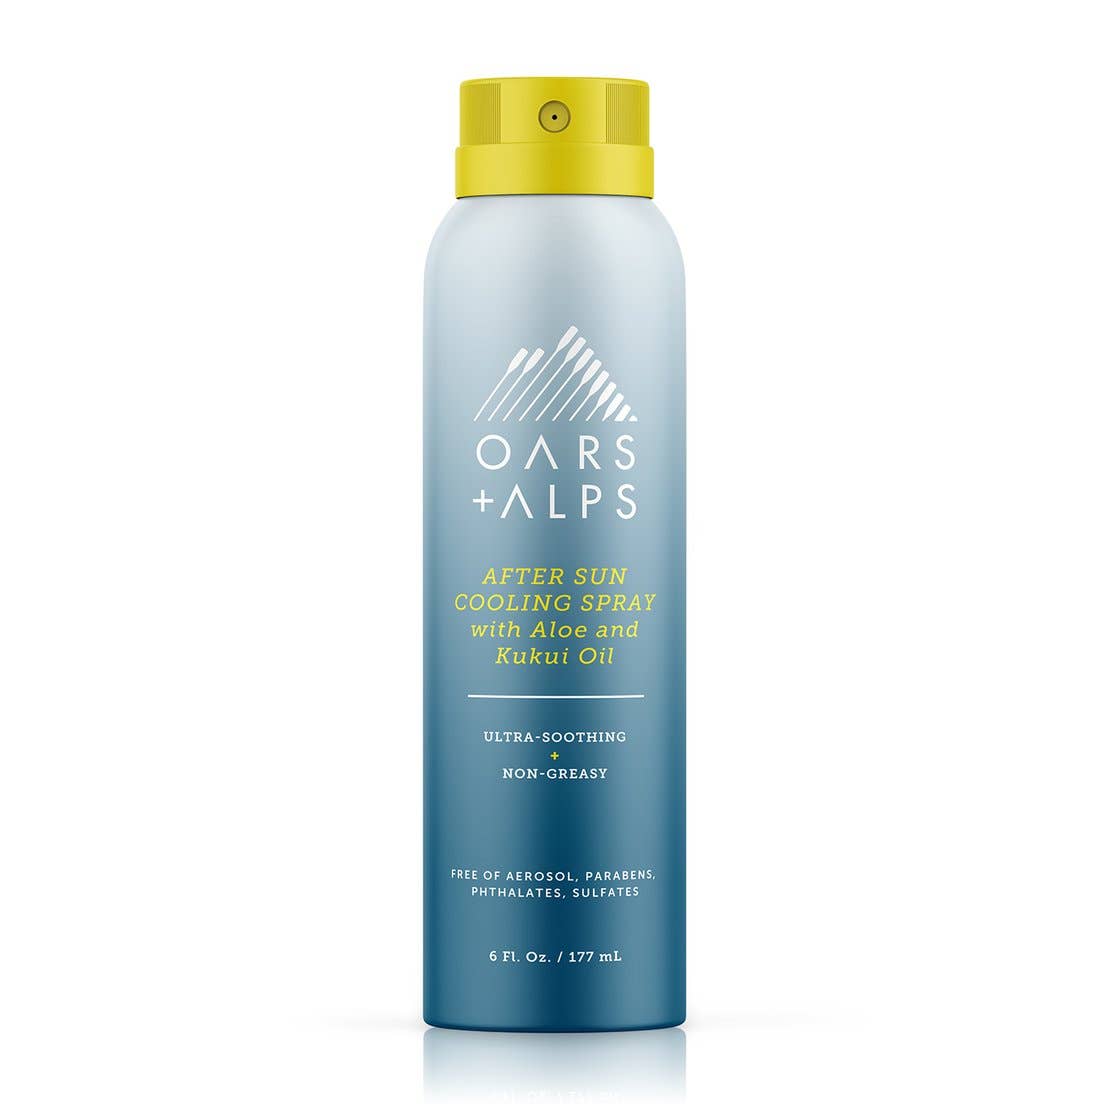 Oars and Alps - After Sun Cooling Spray, Aloe Vera and Niacinamide, 6oz